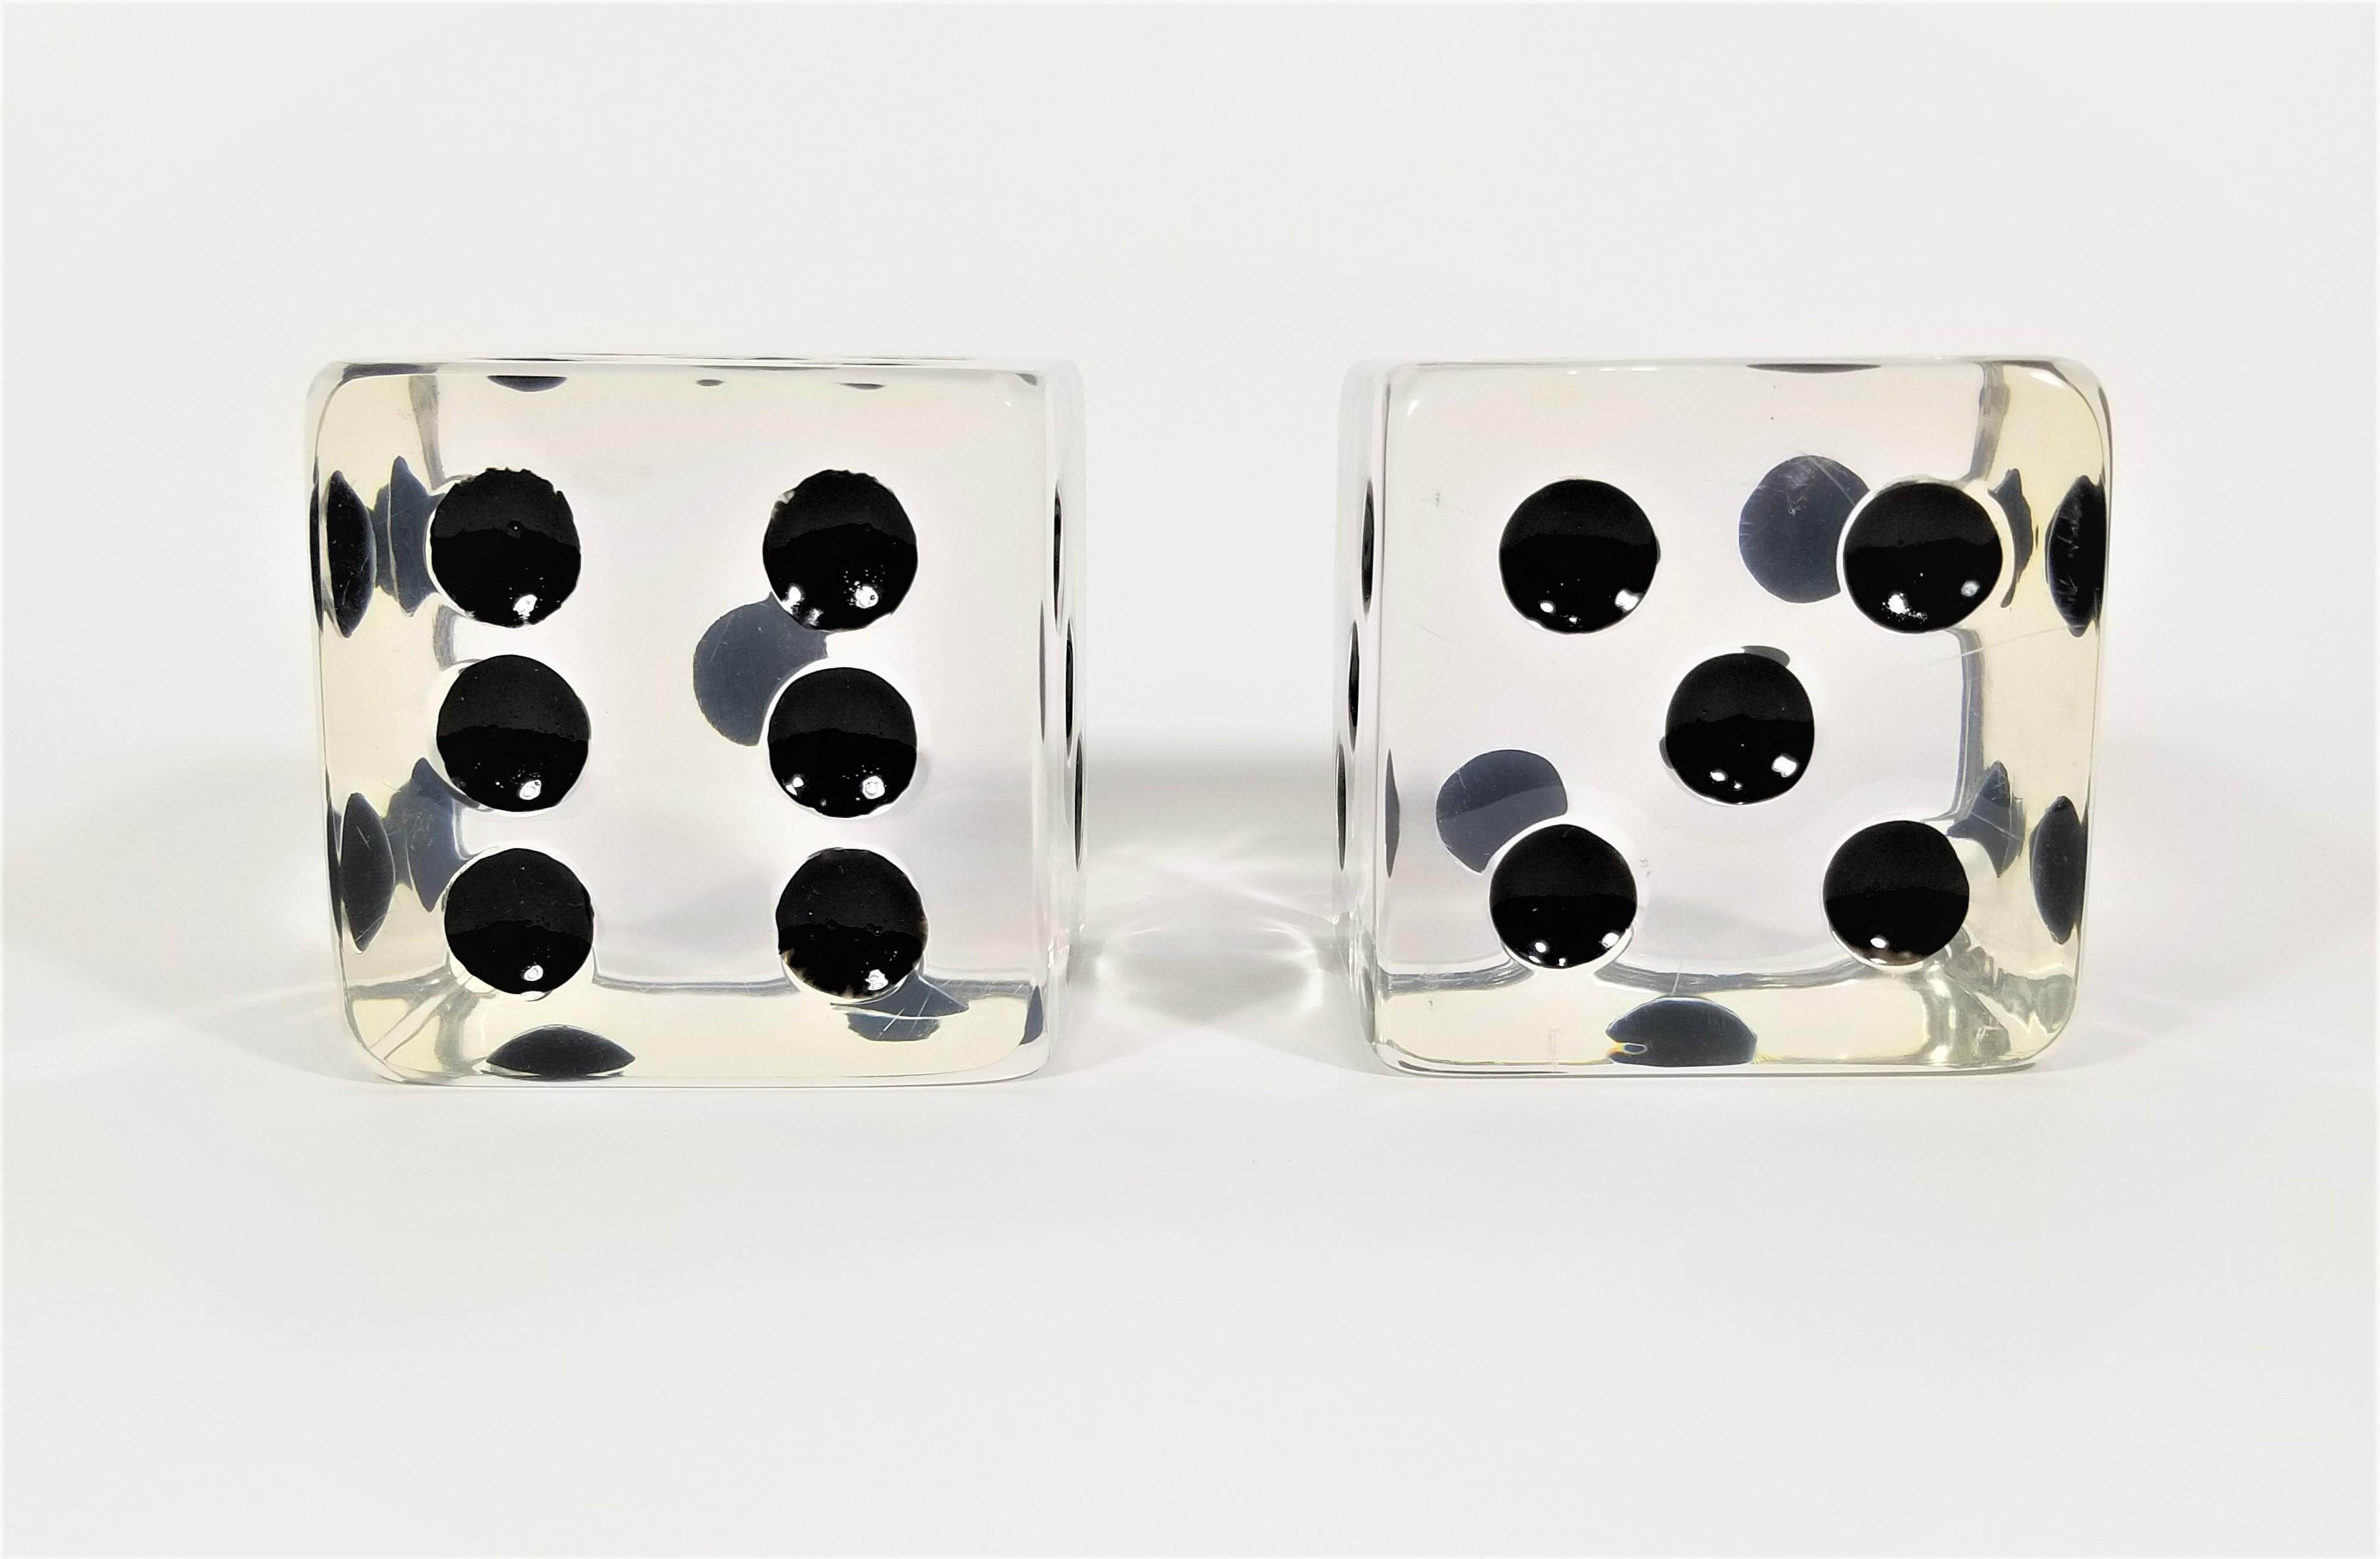 Pair of mid century 1960s solid lucite bookends. Large oversized dice with black dots.
By Charles Hollis Jones.